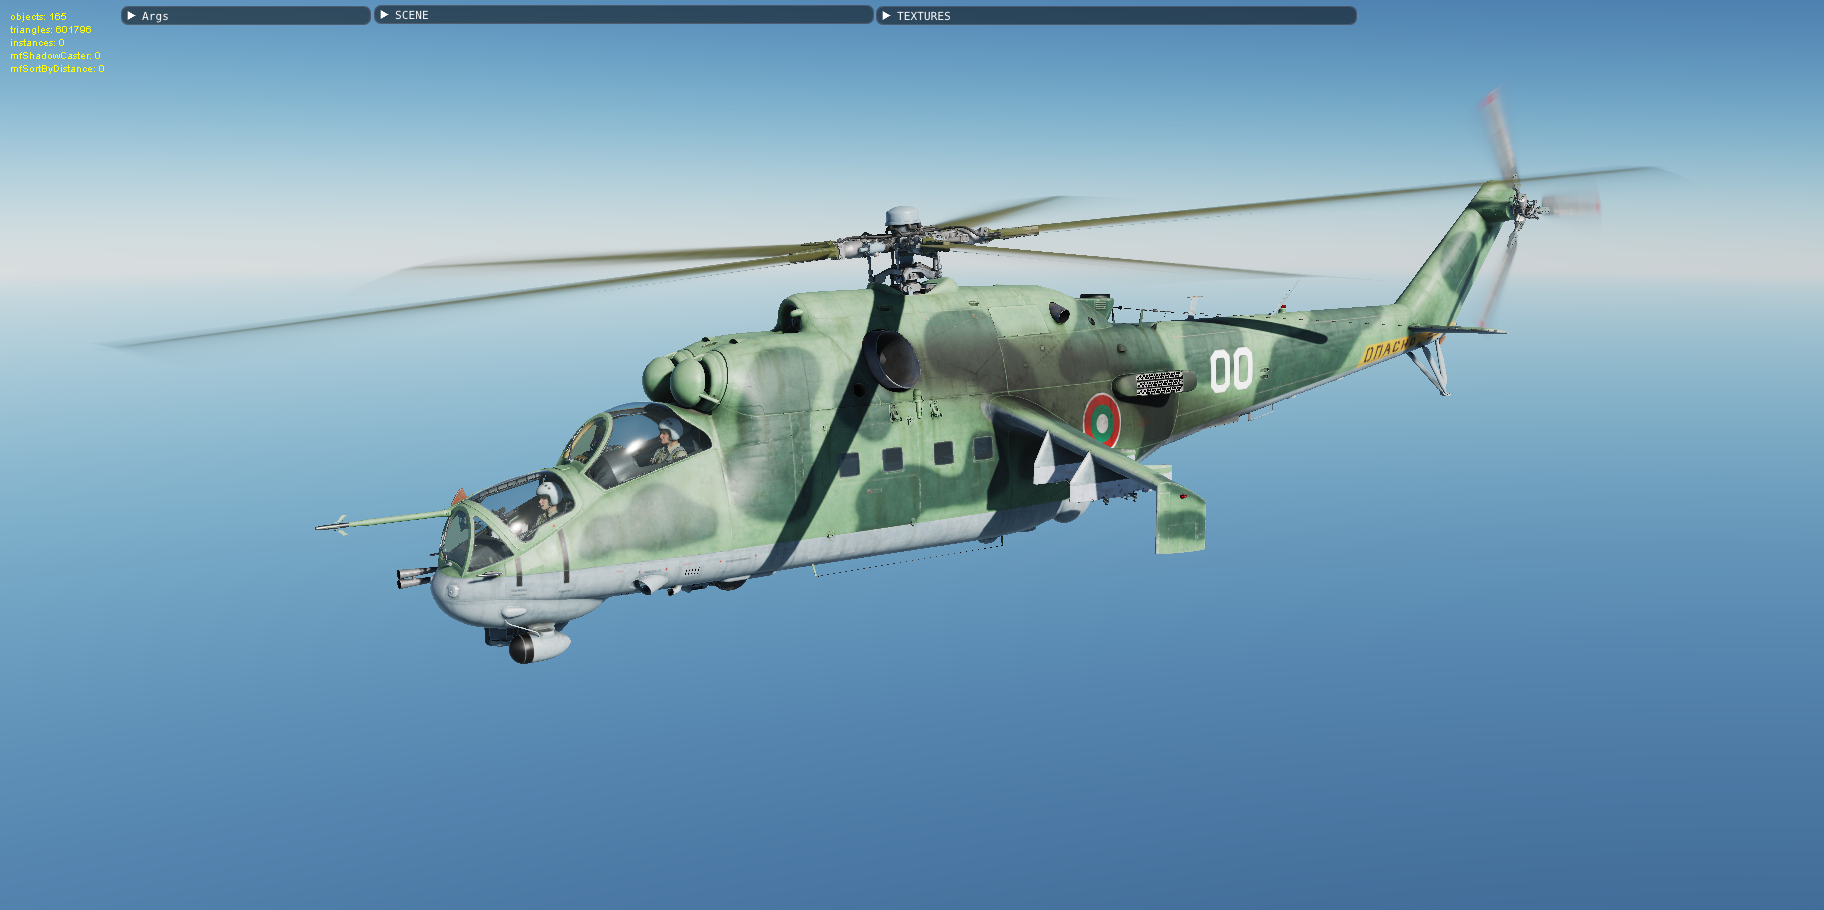 Bulgarian forest skin for the MI-24P